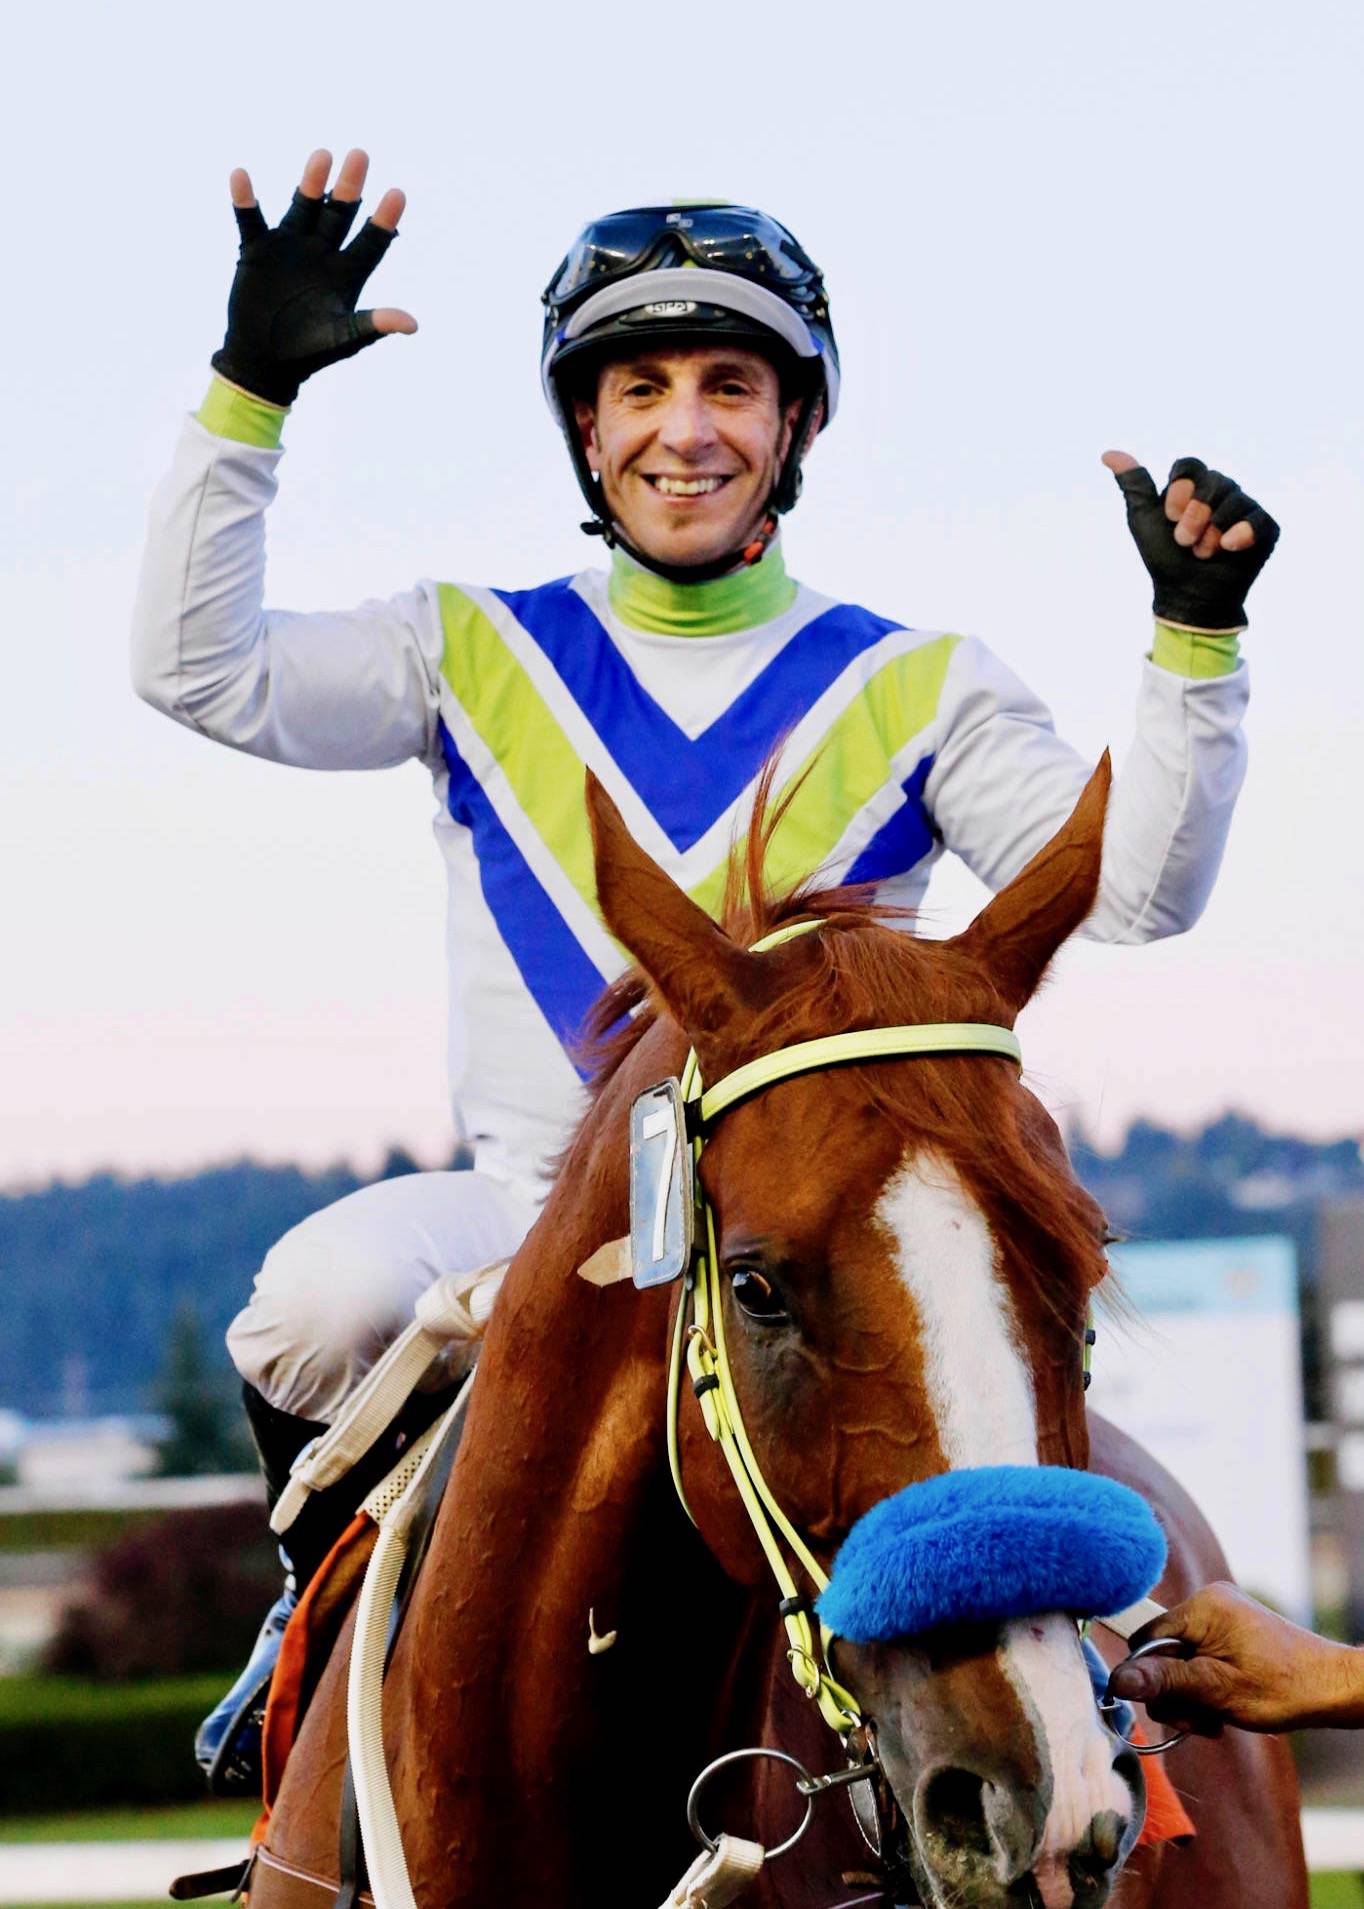 Julien Couton celebrates after riding Blackford to victory – his sixth win of the day – in the ninth race finale Tuesday at Emerald Downs. Couton won despite riding with a broken toe sustained in the final race. COURTESY TRACK PHOTO